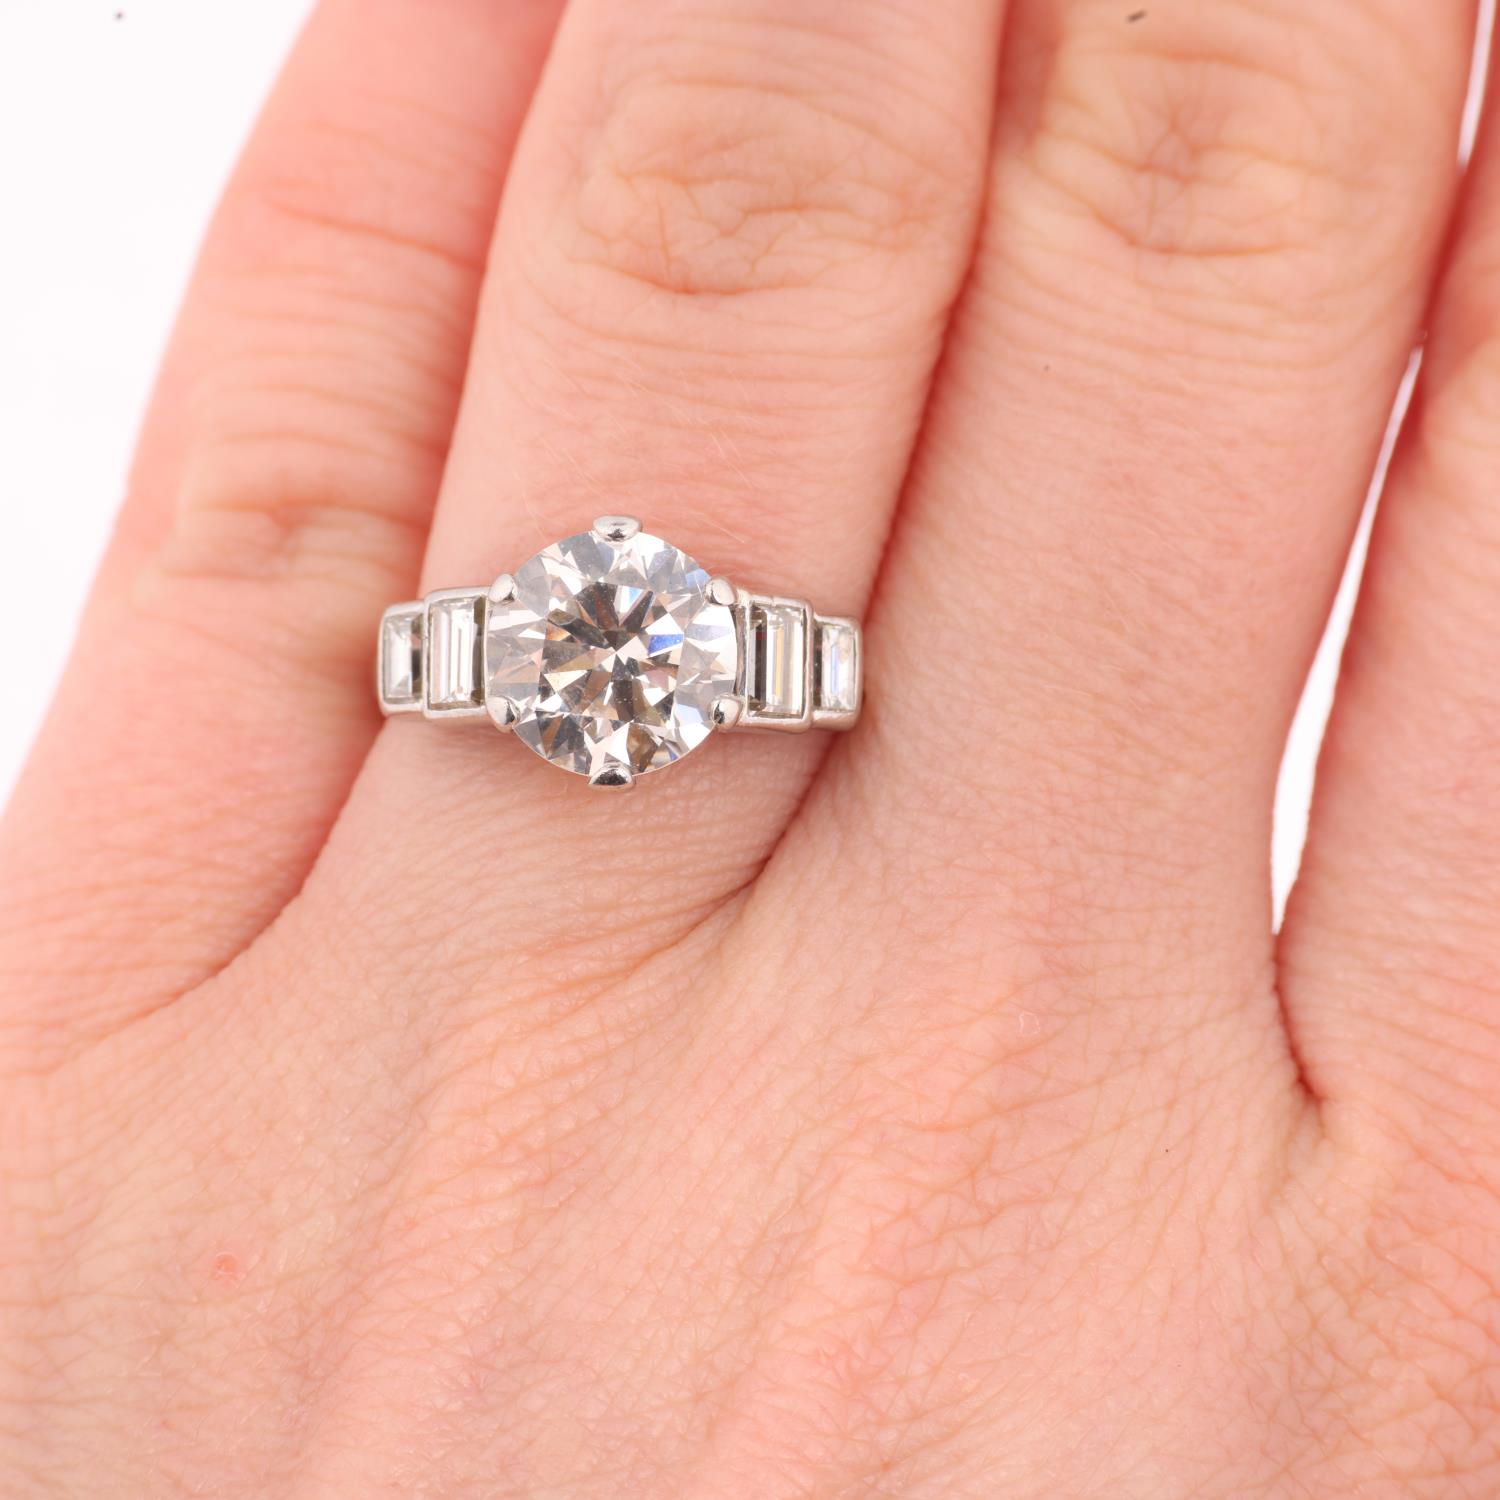 An Art Deco 2.5ct solitaire diamond ring, centrally claw set with 2.5ct round brilliant-cut diamond, - Image 4 of 4